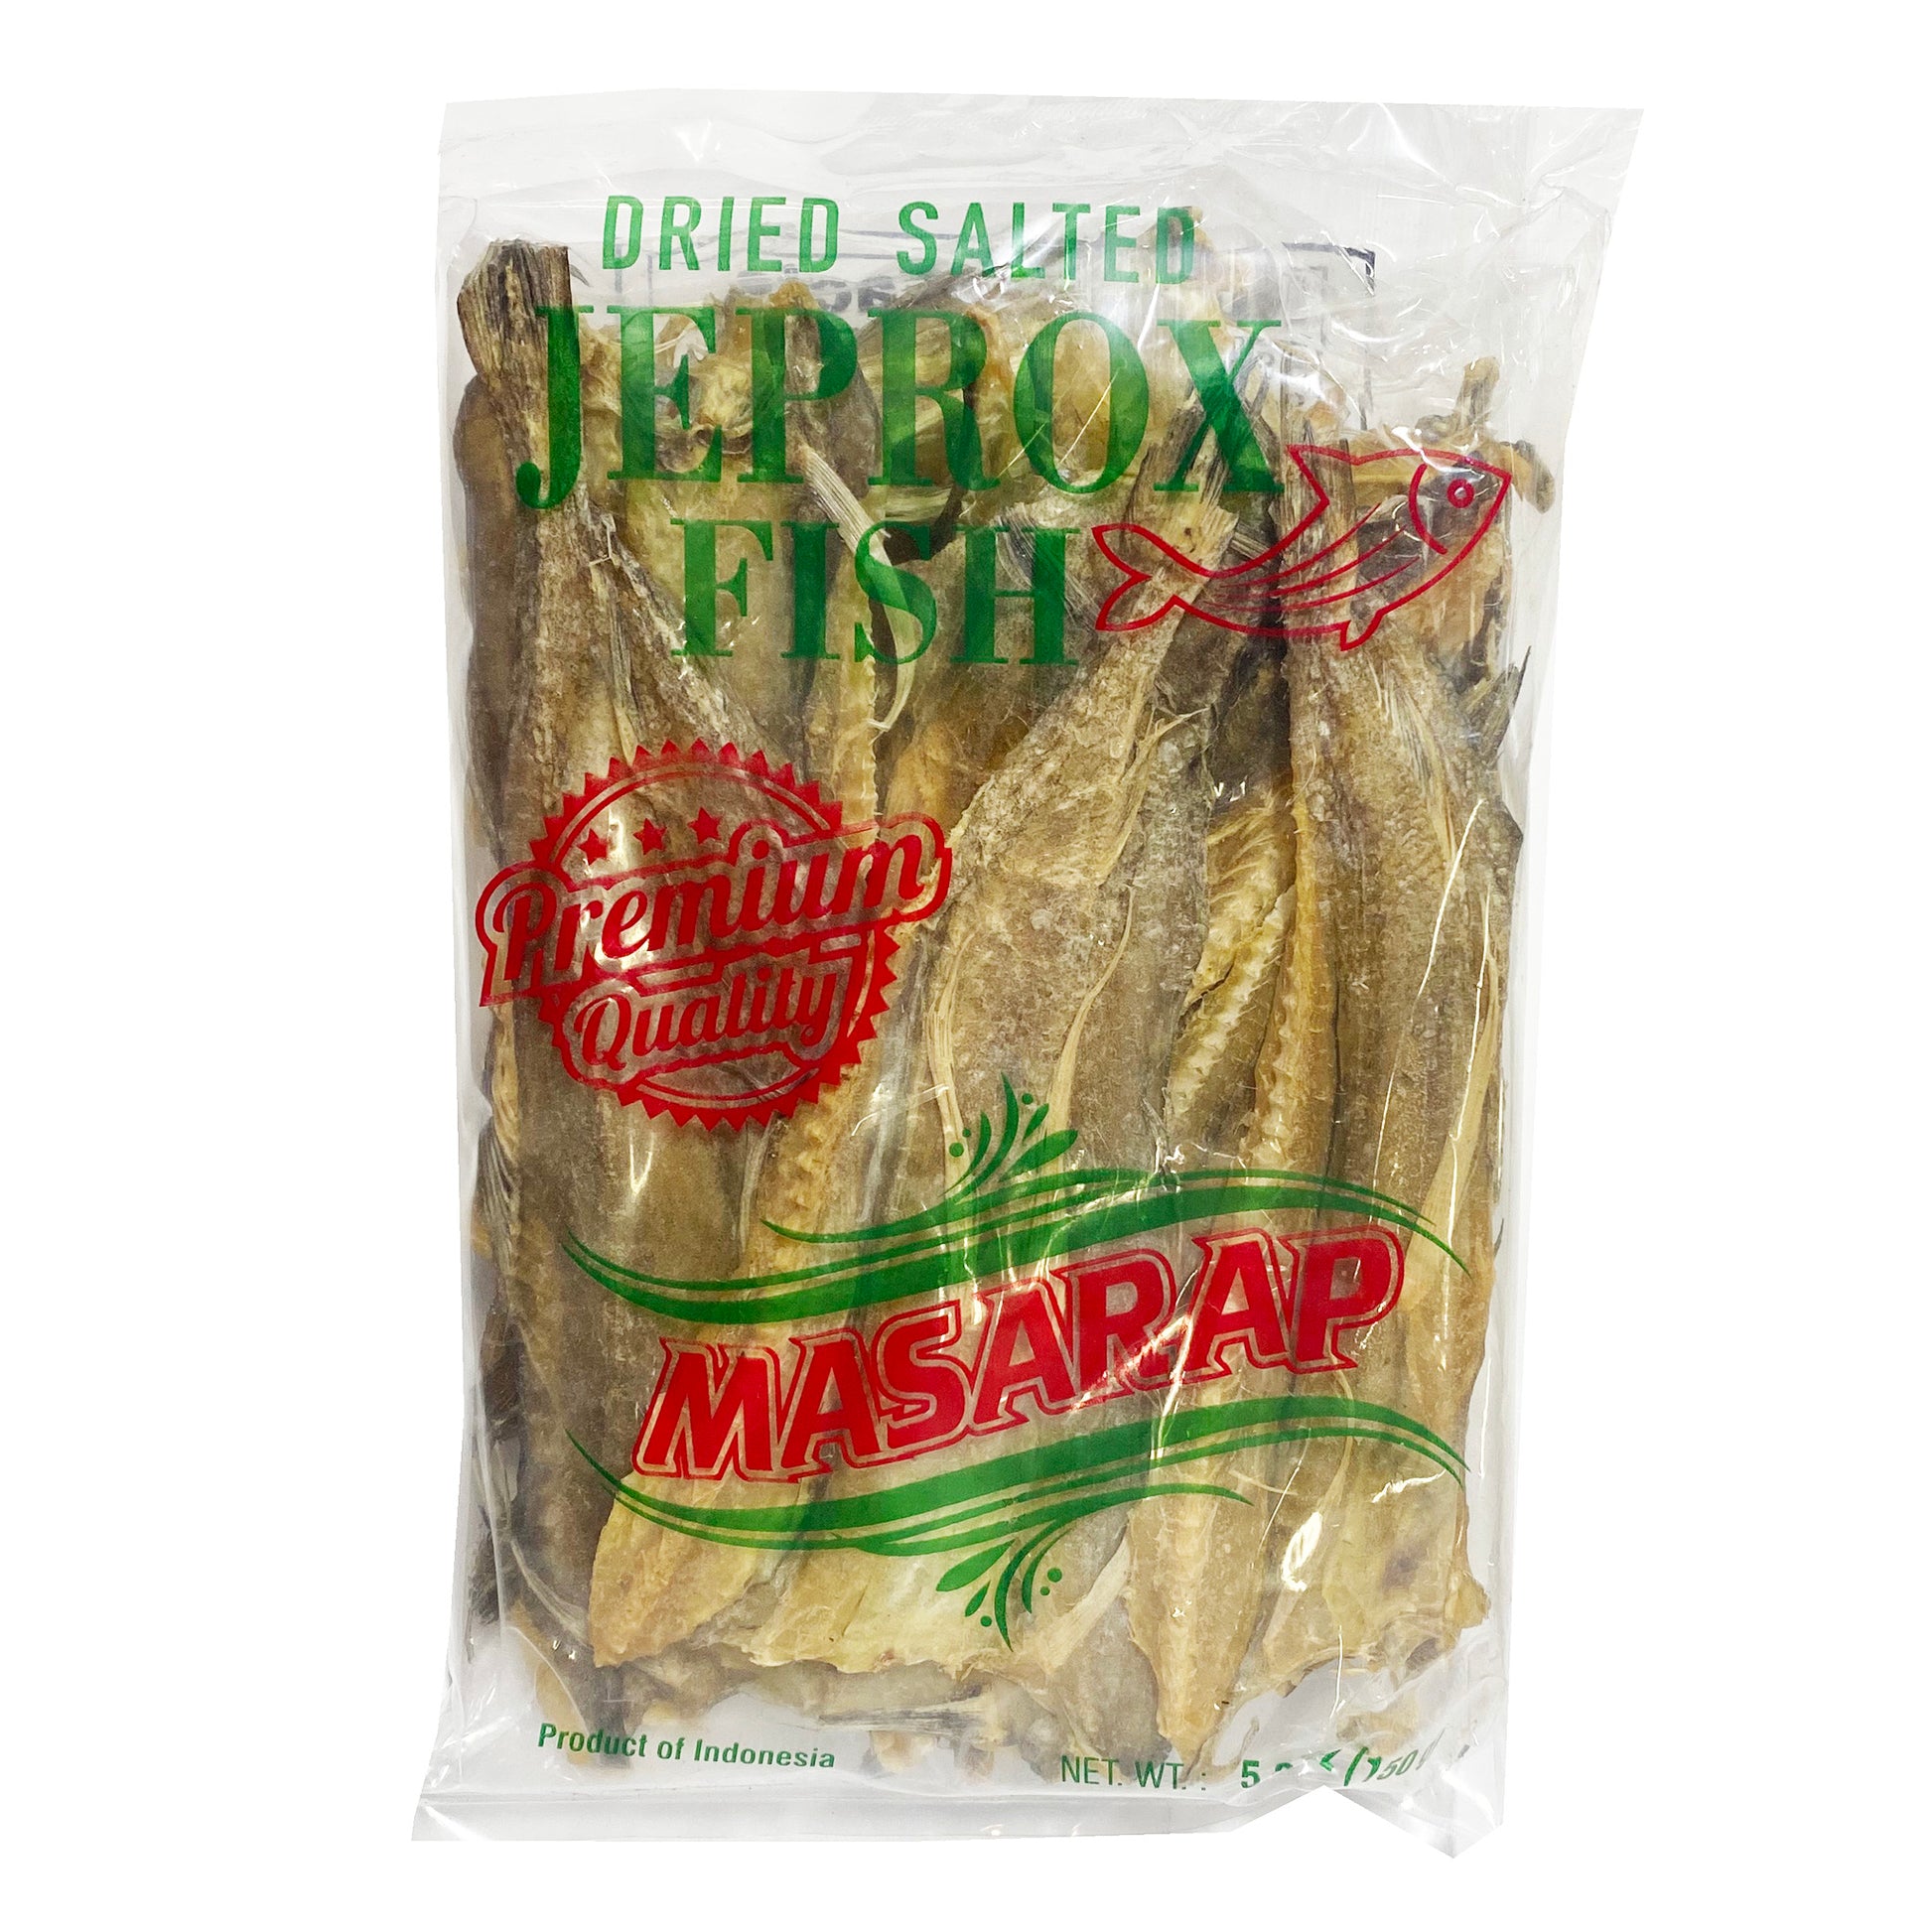 Front graphic image of Masarap Dried Salted Fish - Jeprox 5.29oz